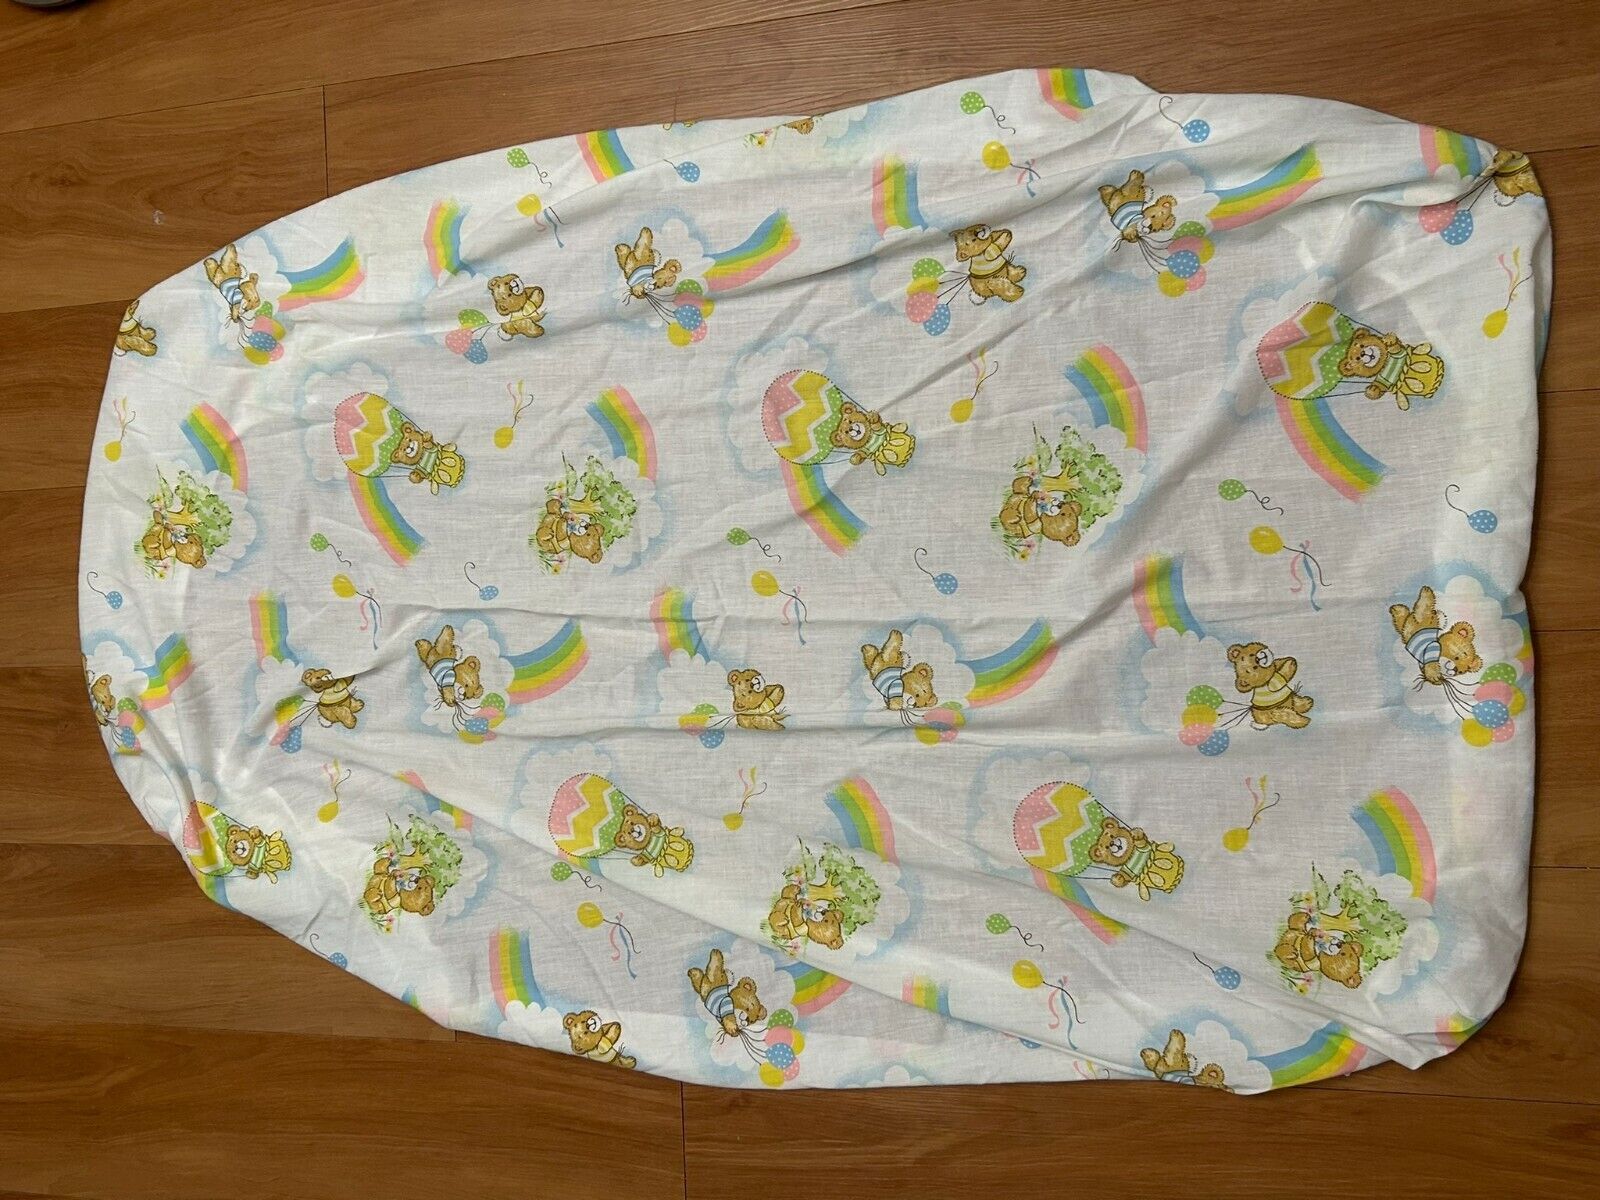 VTG 80s Rainbow Clouds Bears Unisex Crib Bed Fitted Sheet